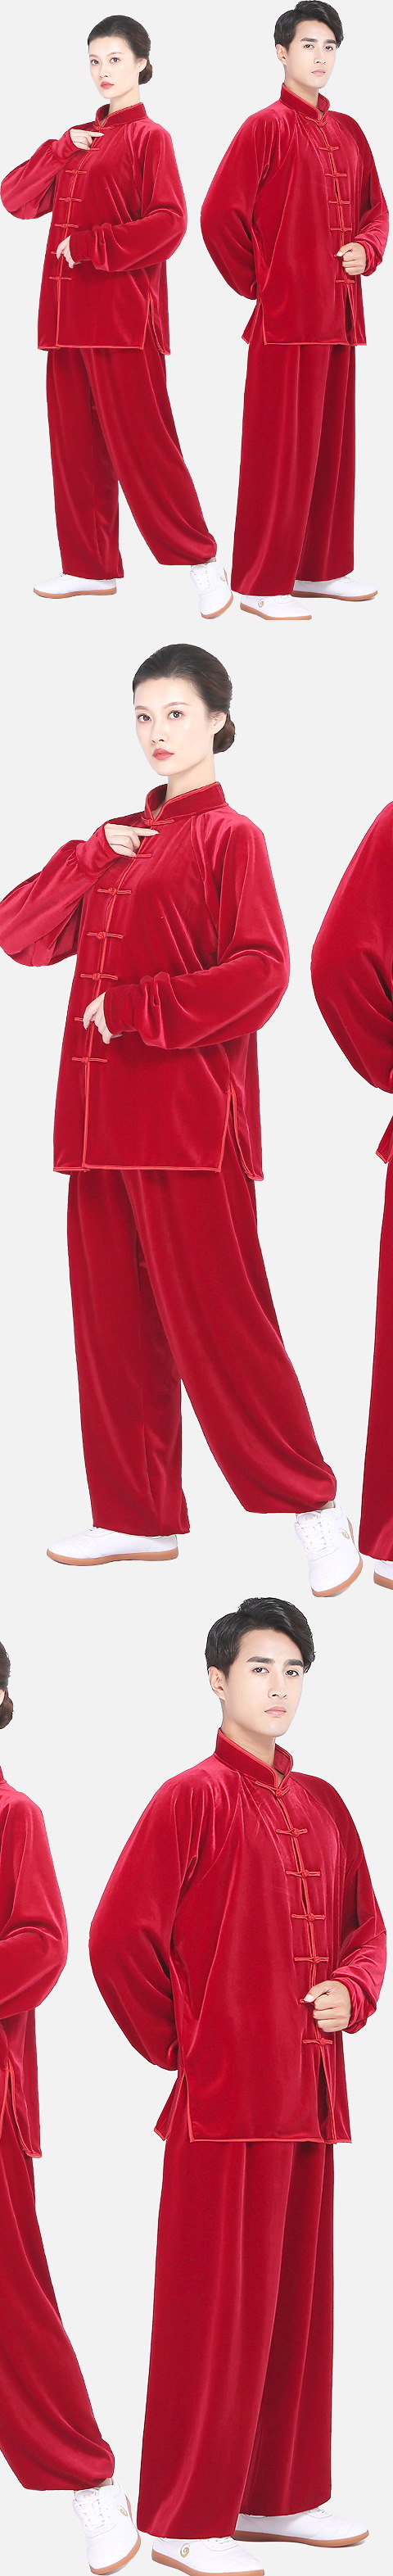 Professional Taichi Kungfu Uniform with Pants - Velvet - Rusty Red (RM)